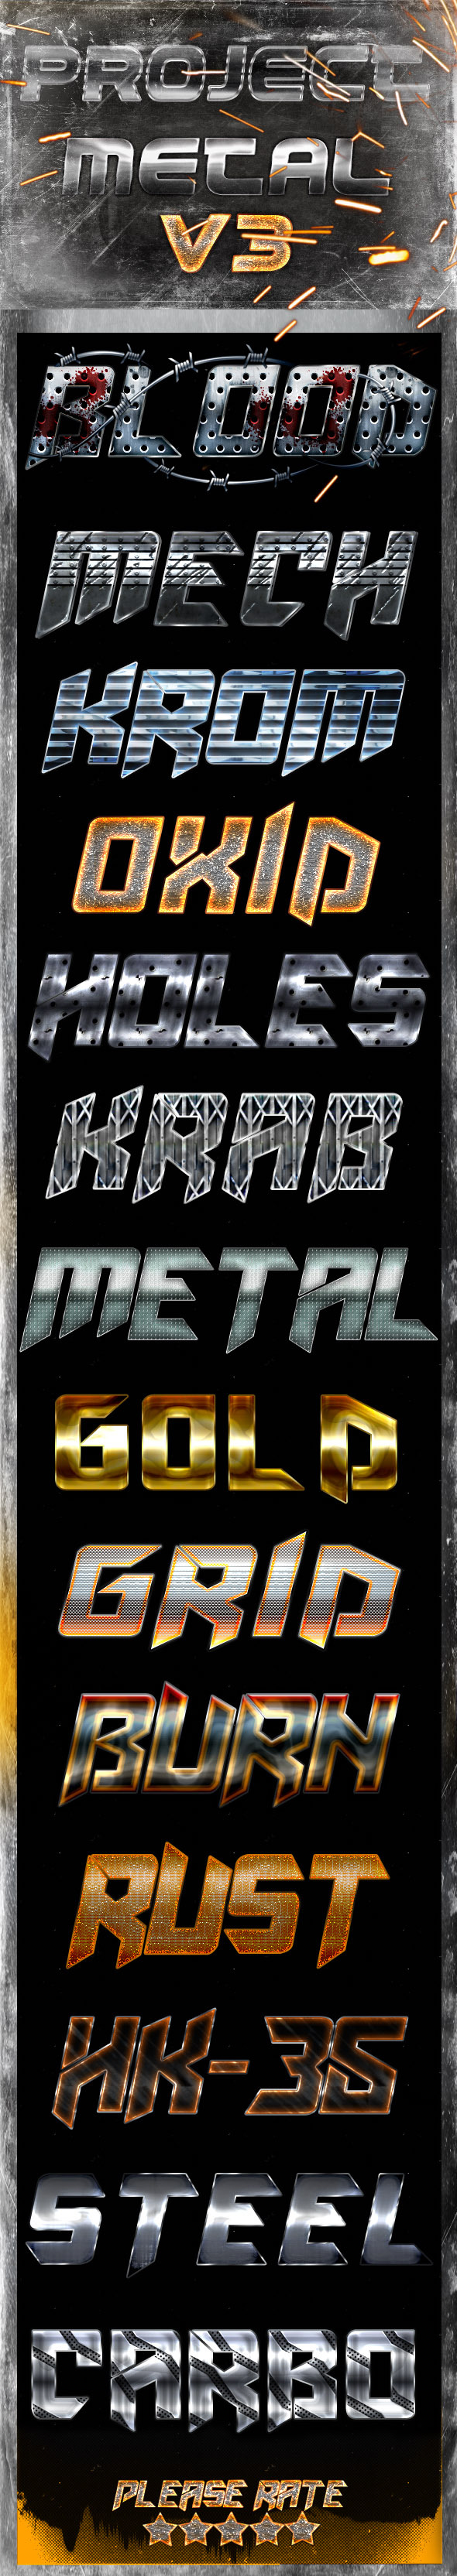 Project Metal V3 - Photoshop Text Styles